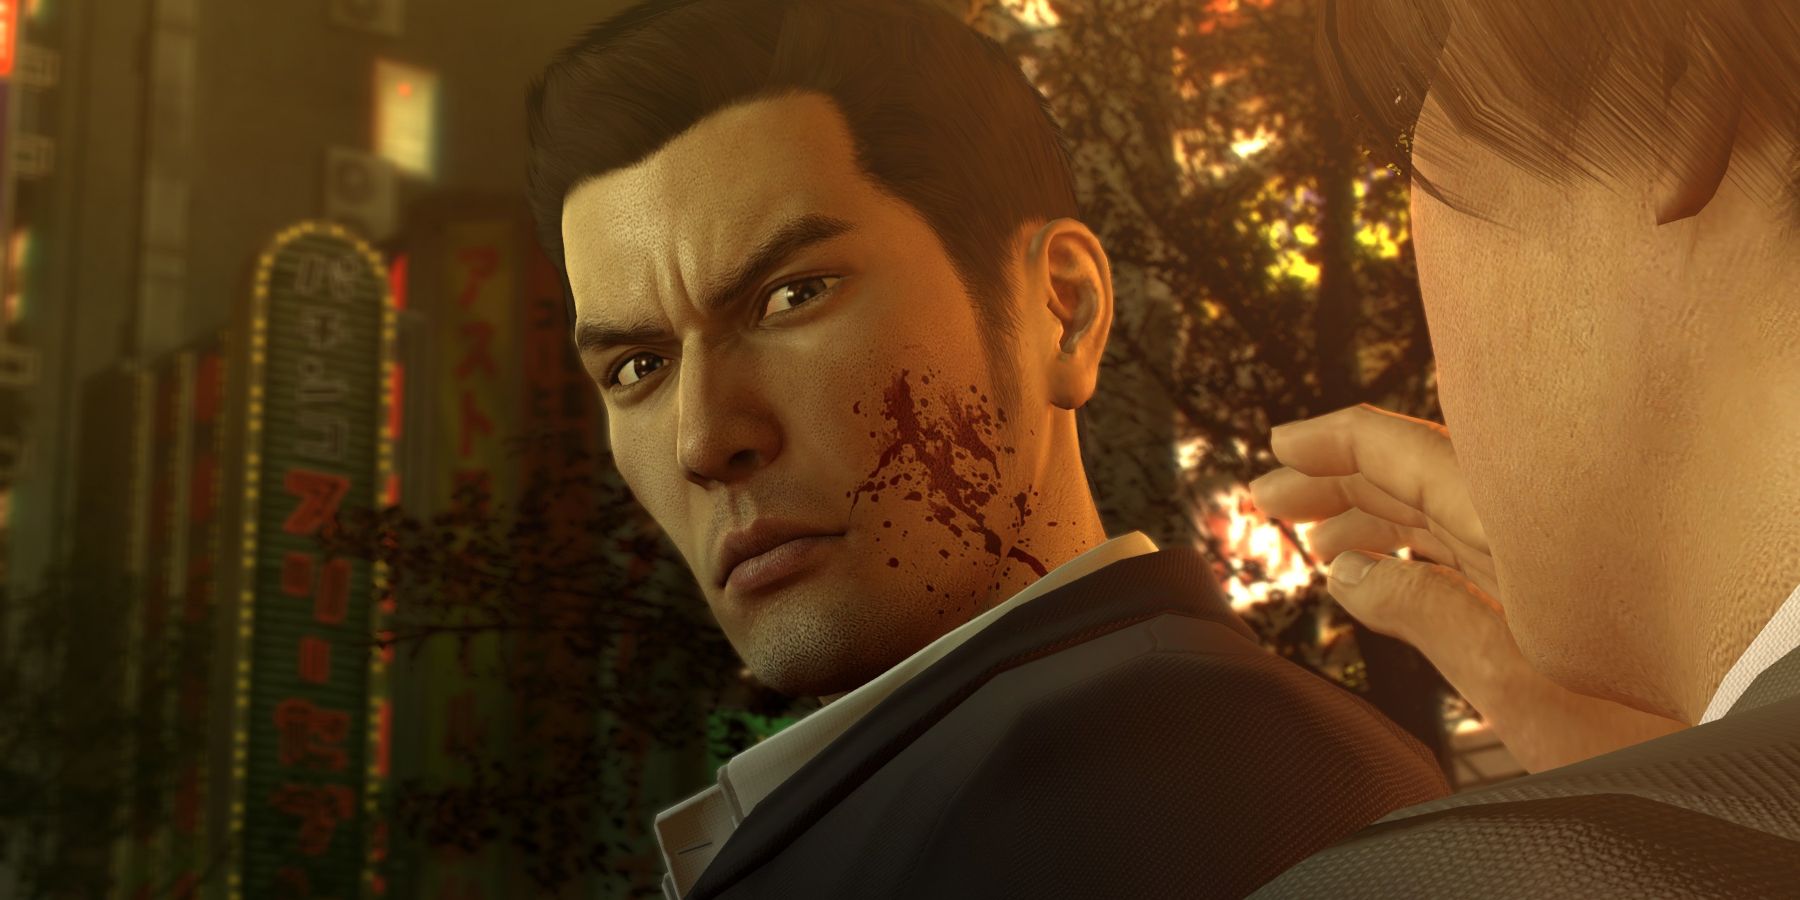 PlayStation Plus Game Catalog lineup for August: Yakuza 0, Trials of Mana,  Dead by Daylight, Bugsnax – PlayStation.Blog